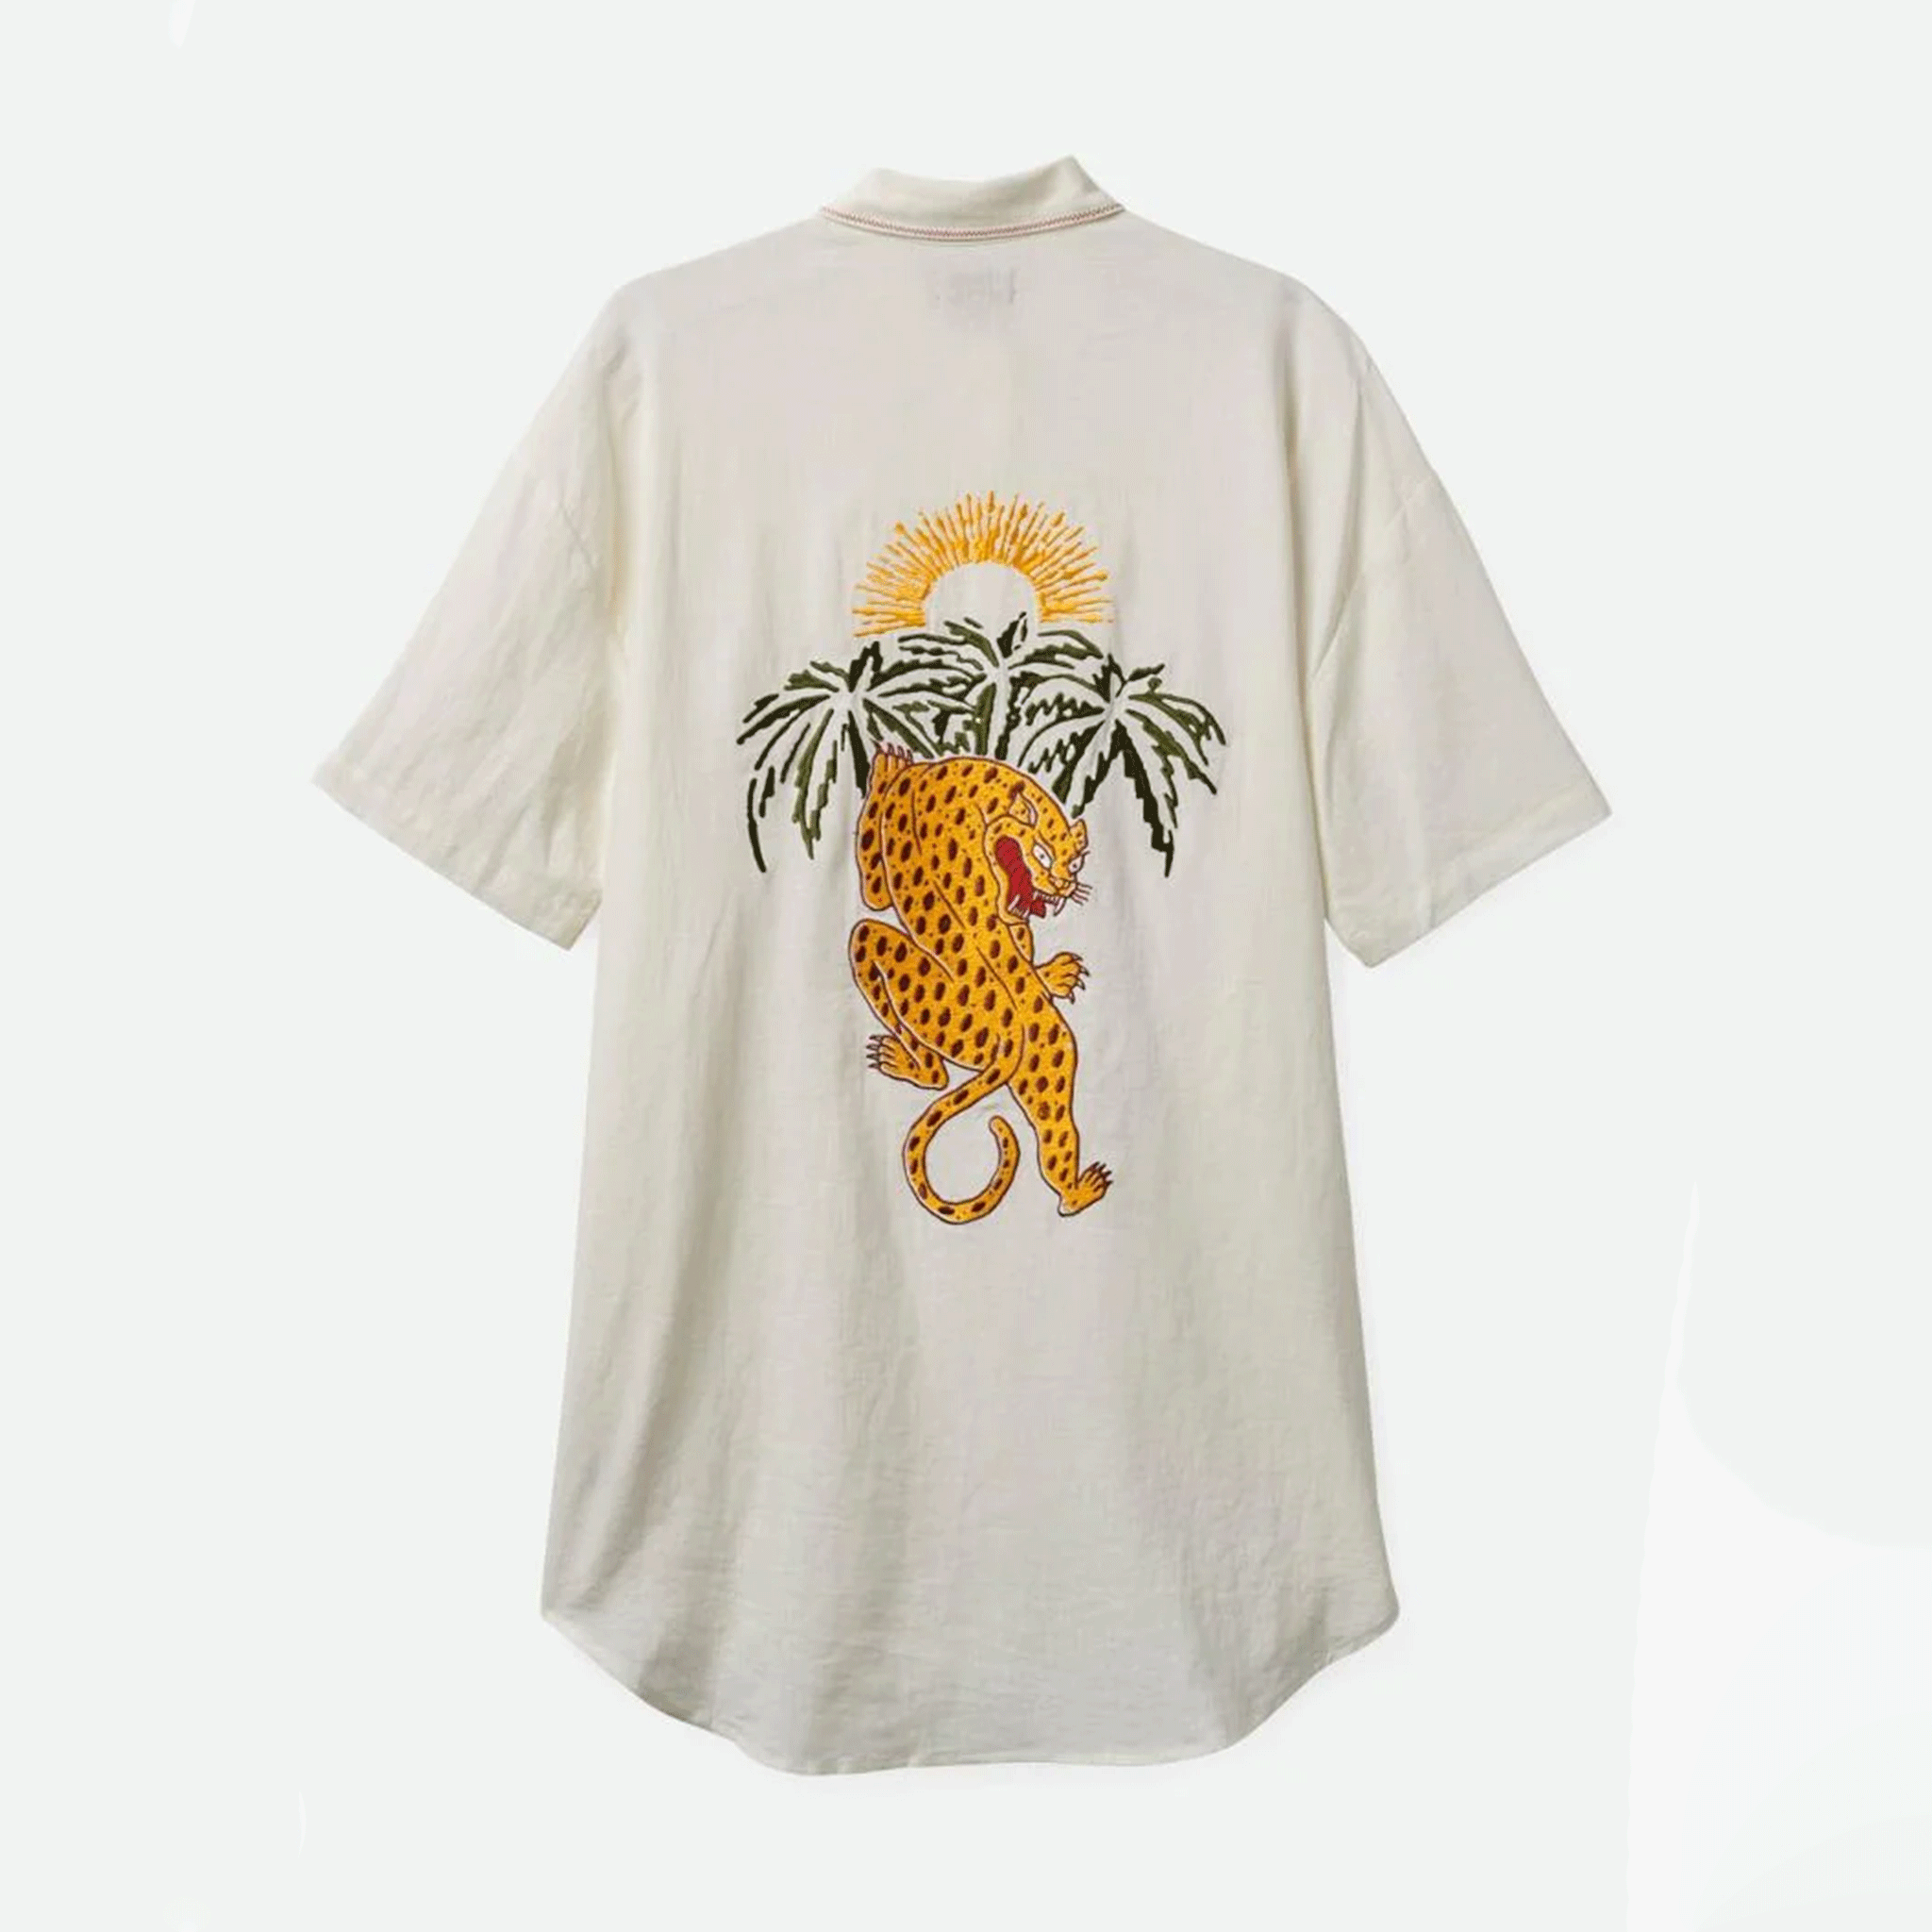 On a white background is a shirt dress with short sleeves and a jaguar and palm tree graphic on the back. 